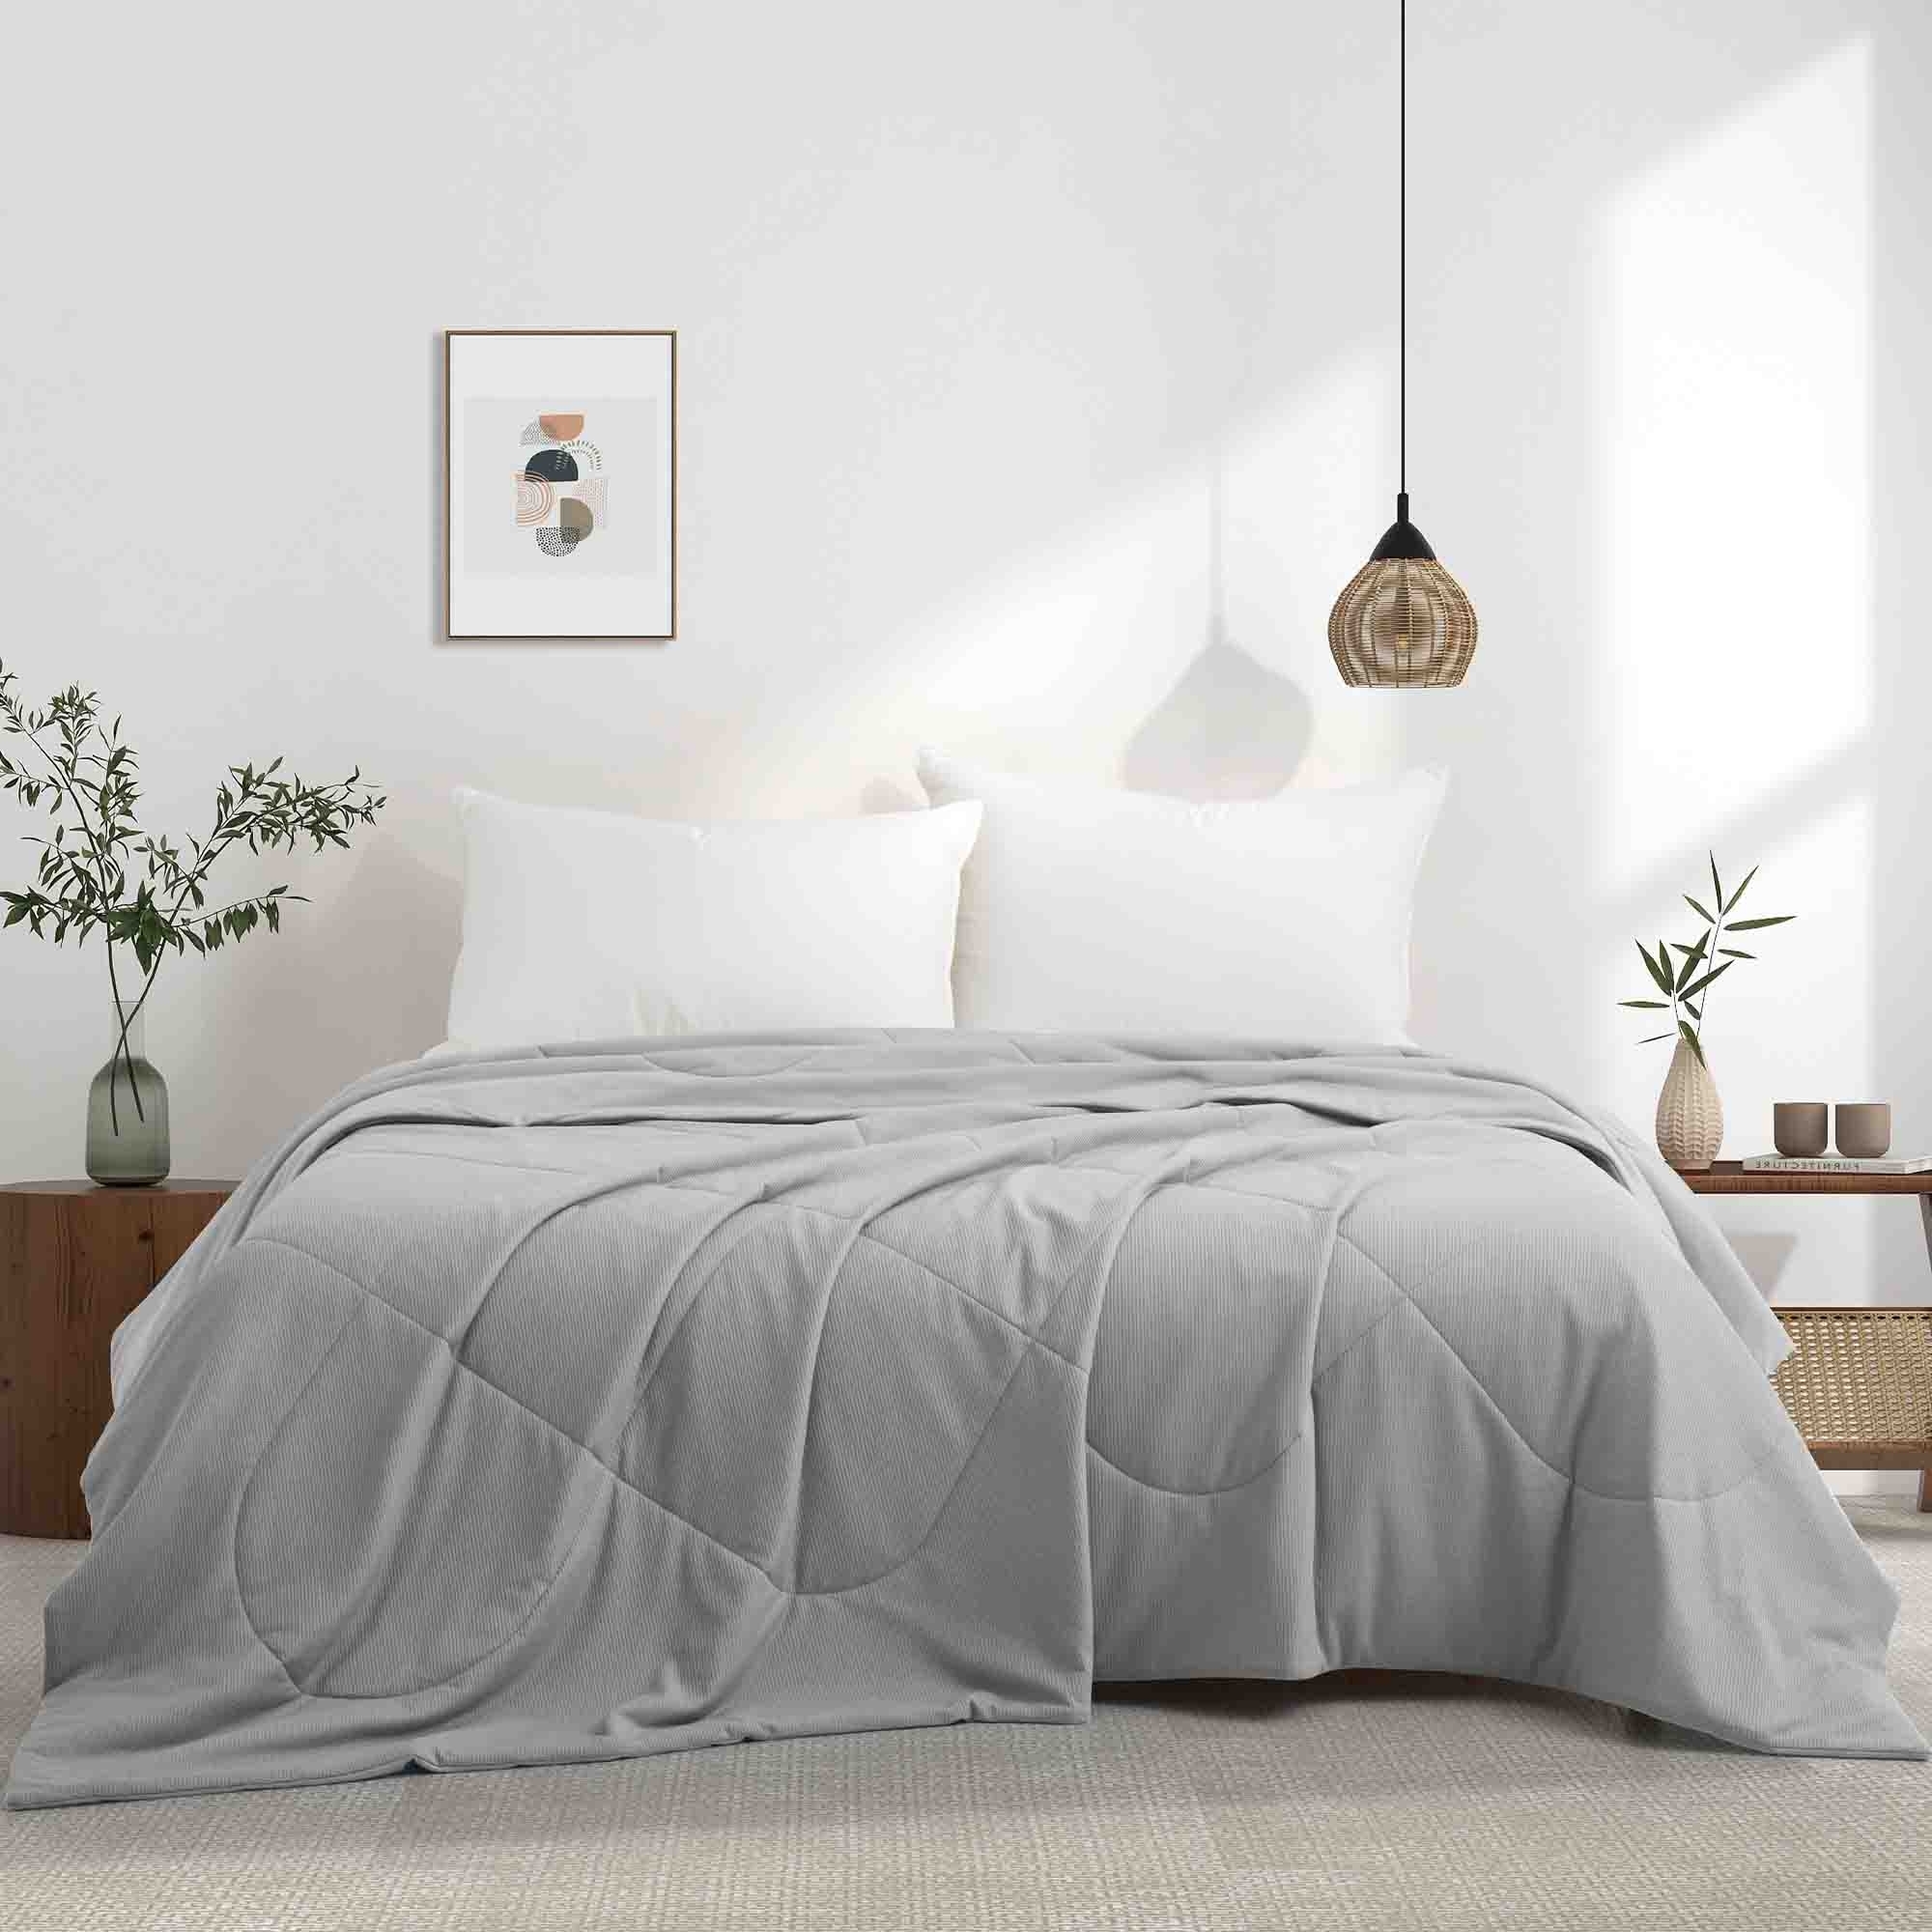 Reversible Silky Oversize Blanket With Waffle Design Bed Blanket - Light Gray, Twin